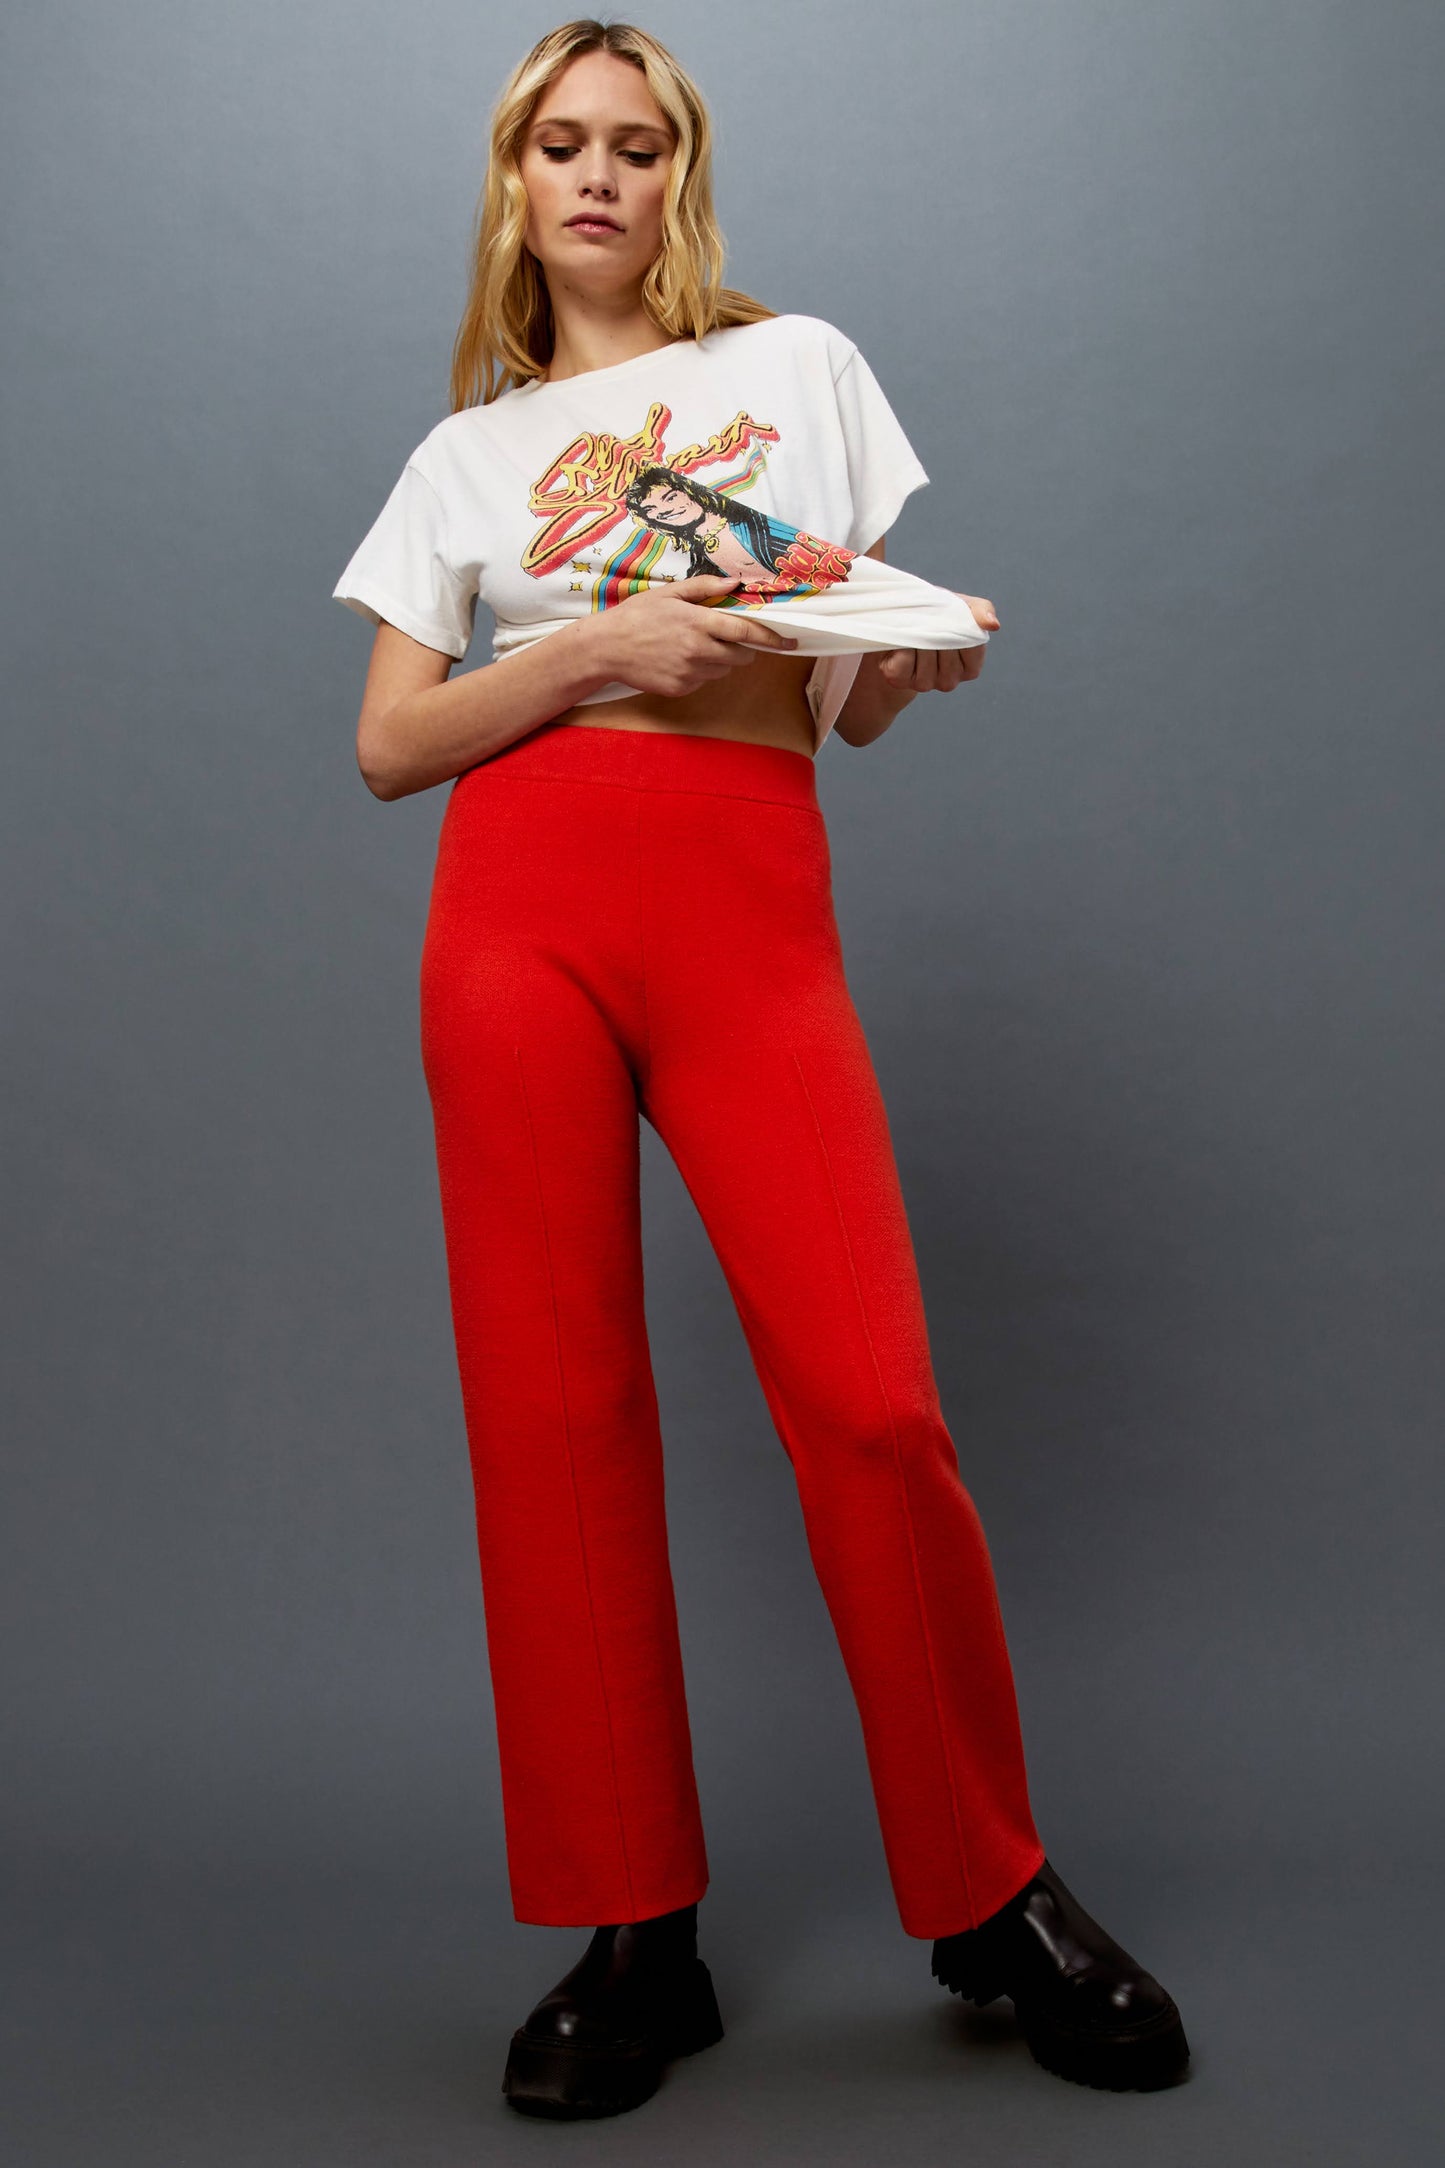 Model wearing a pair of knit pintuck pants in hot orange styled with a Rod Stewart rainbow artwork graphic tee